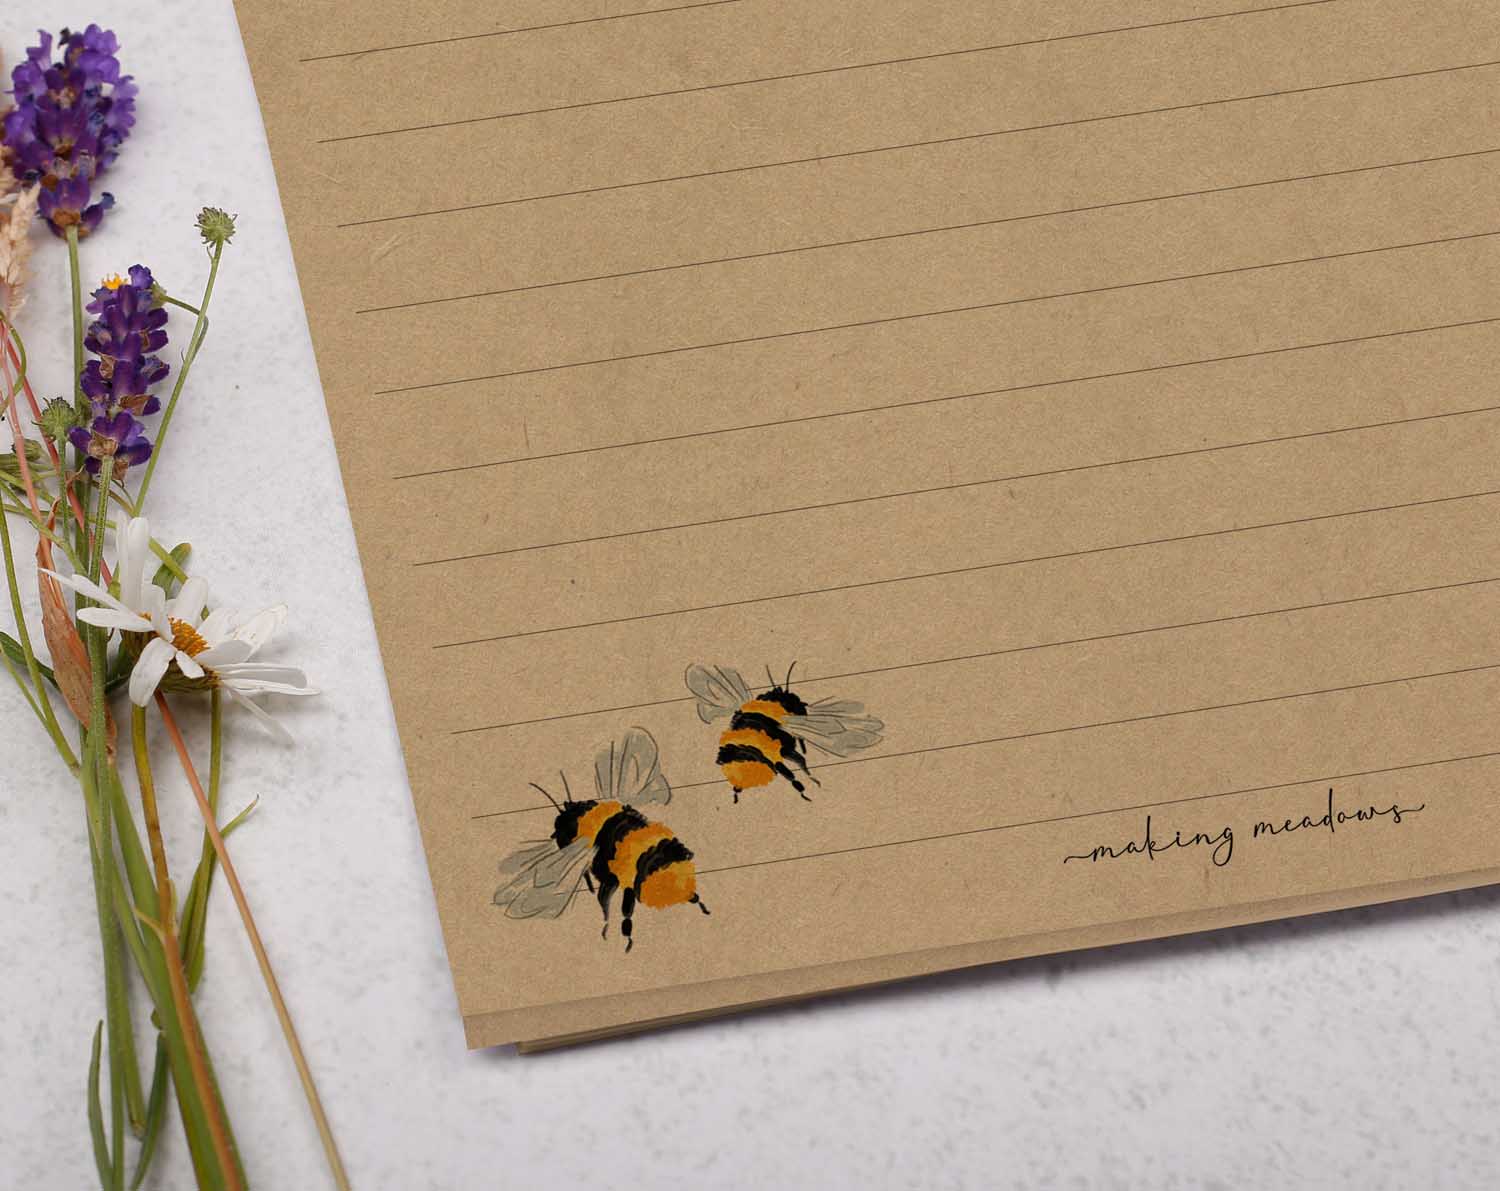 A5 Kraft letter writing paper sheets with a cute bumble bee design.